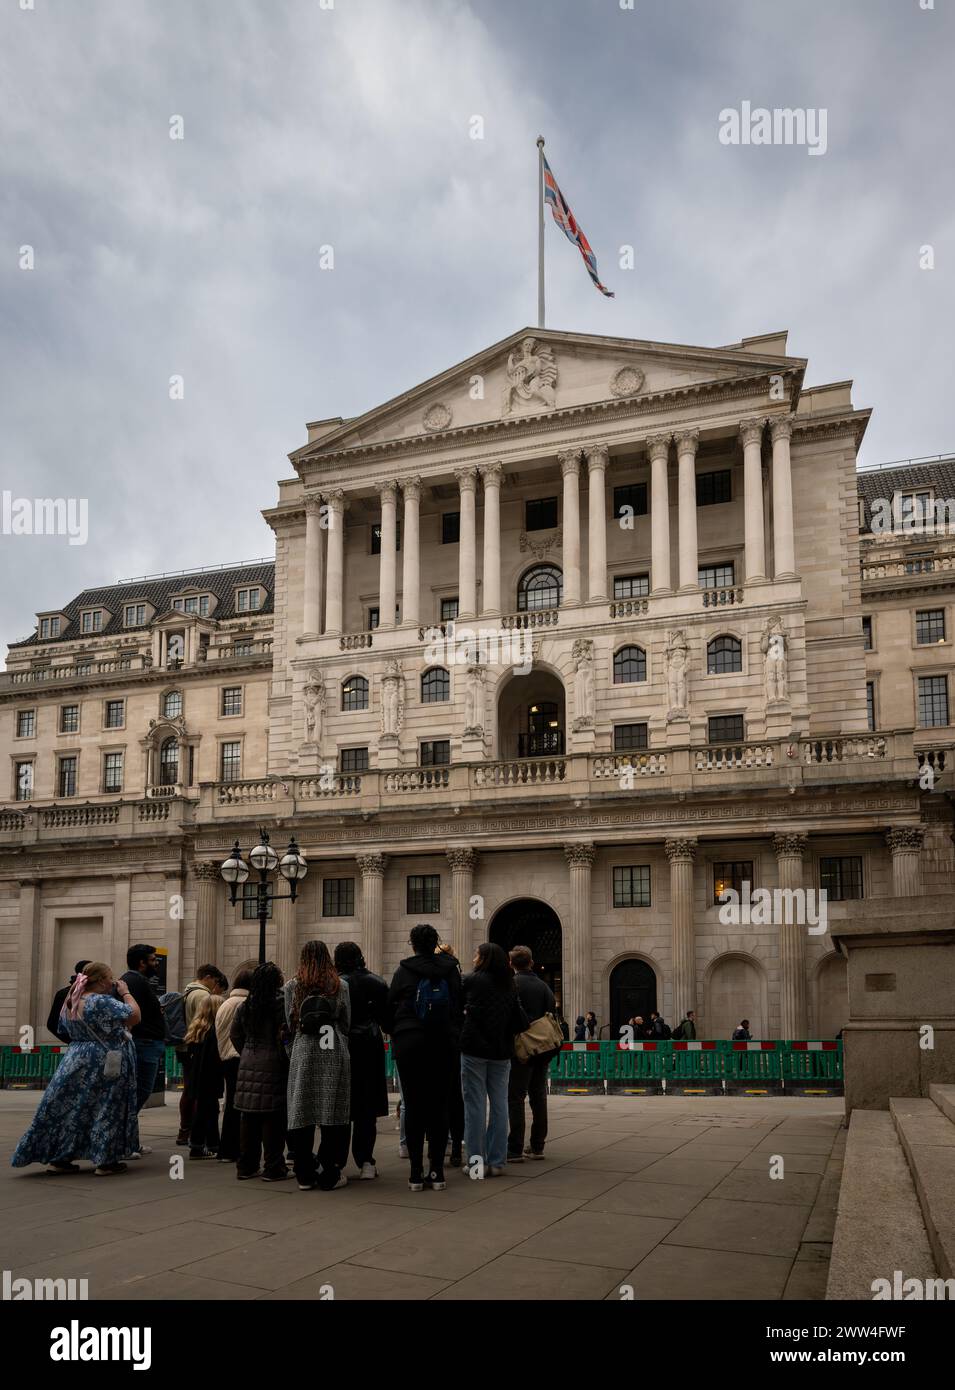 London, UK: The Bank of England on Threadneedle Street in the City of London. Group of people in the foreground. Stock Photo